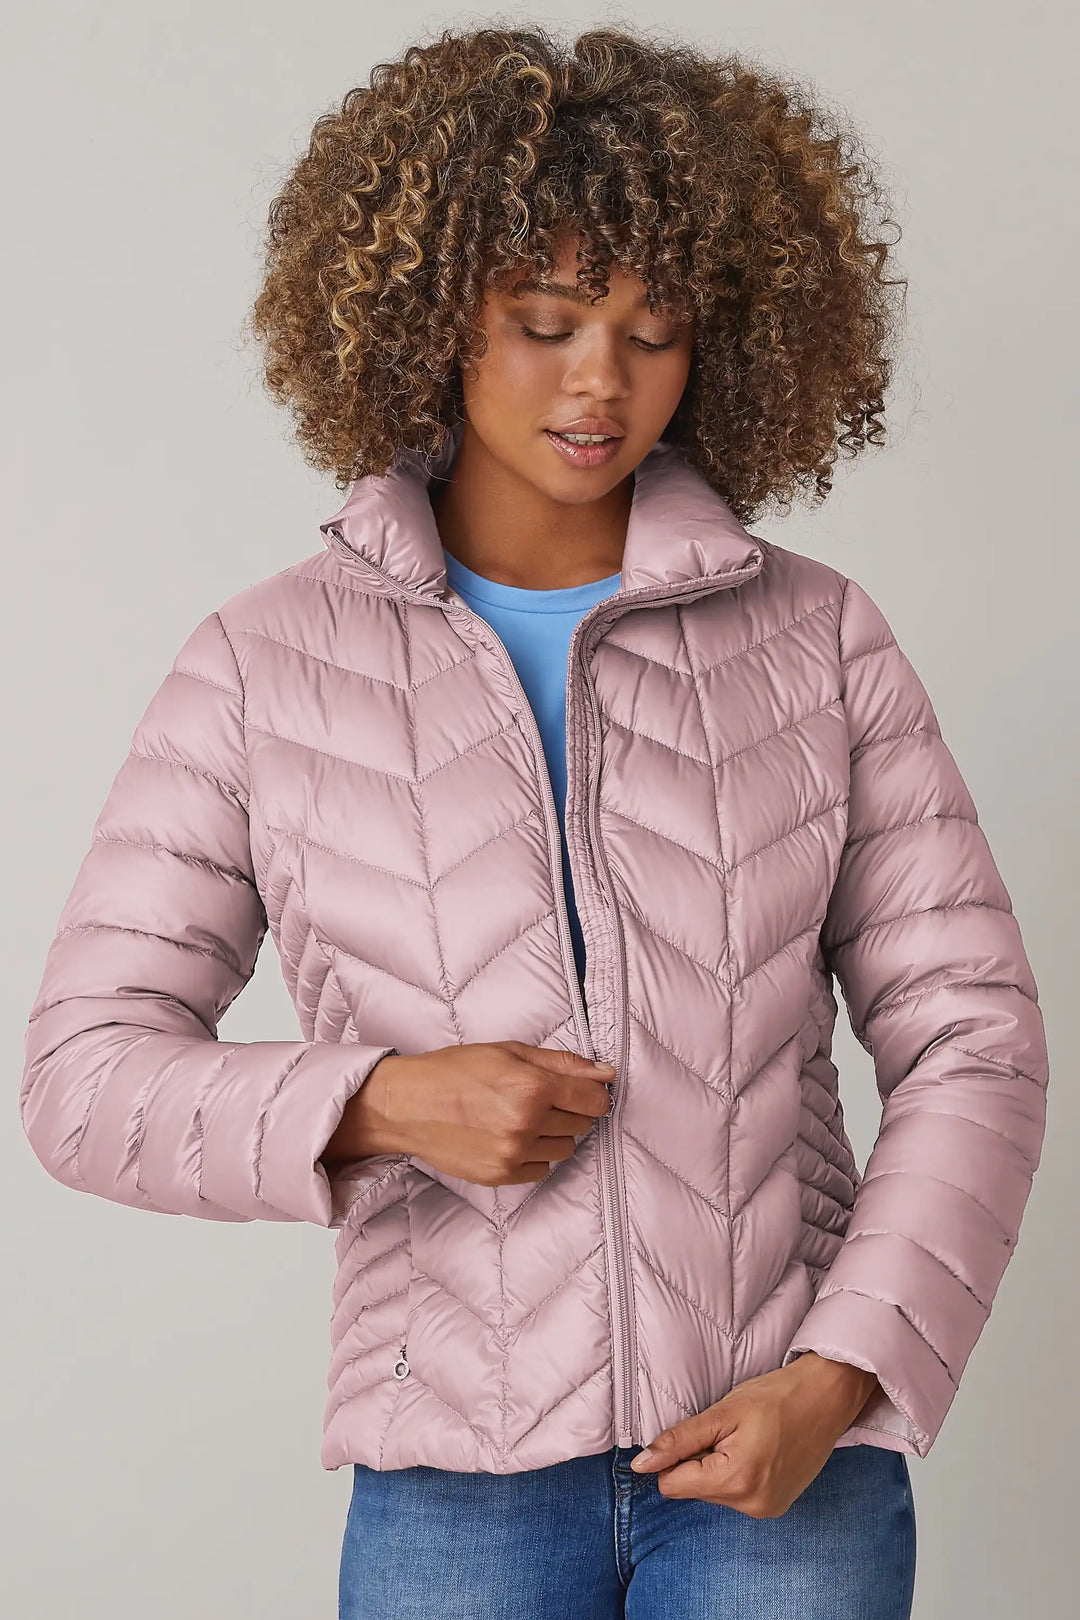 Model wearing a pale pink quilted jacket with a high collar and zipper, styled over a blue top and denim jeans, style 0124-2040-62-33